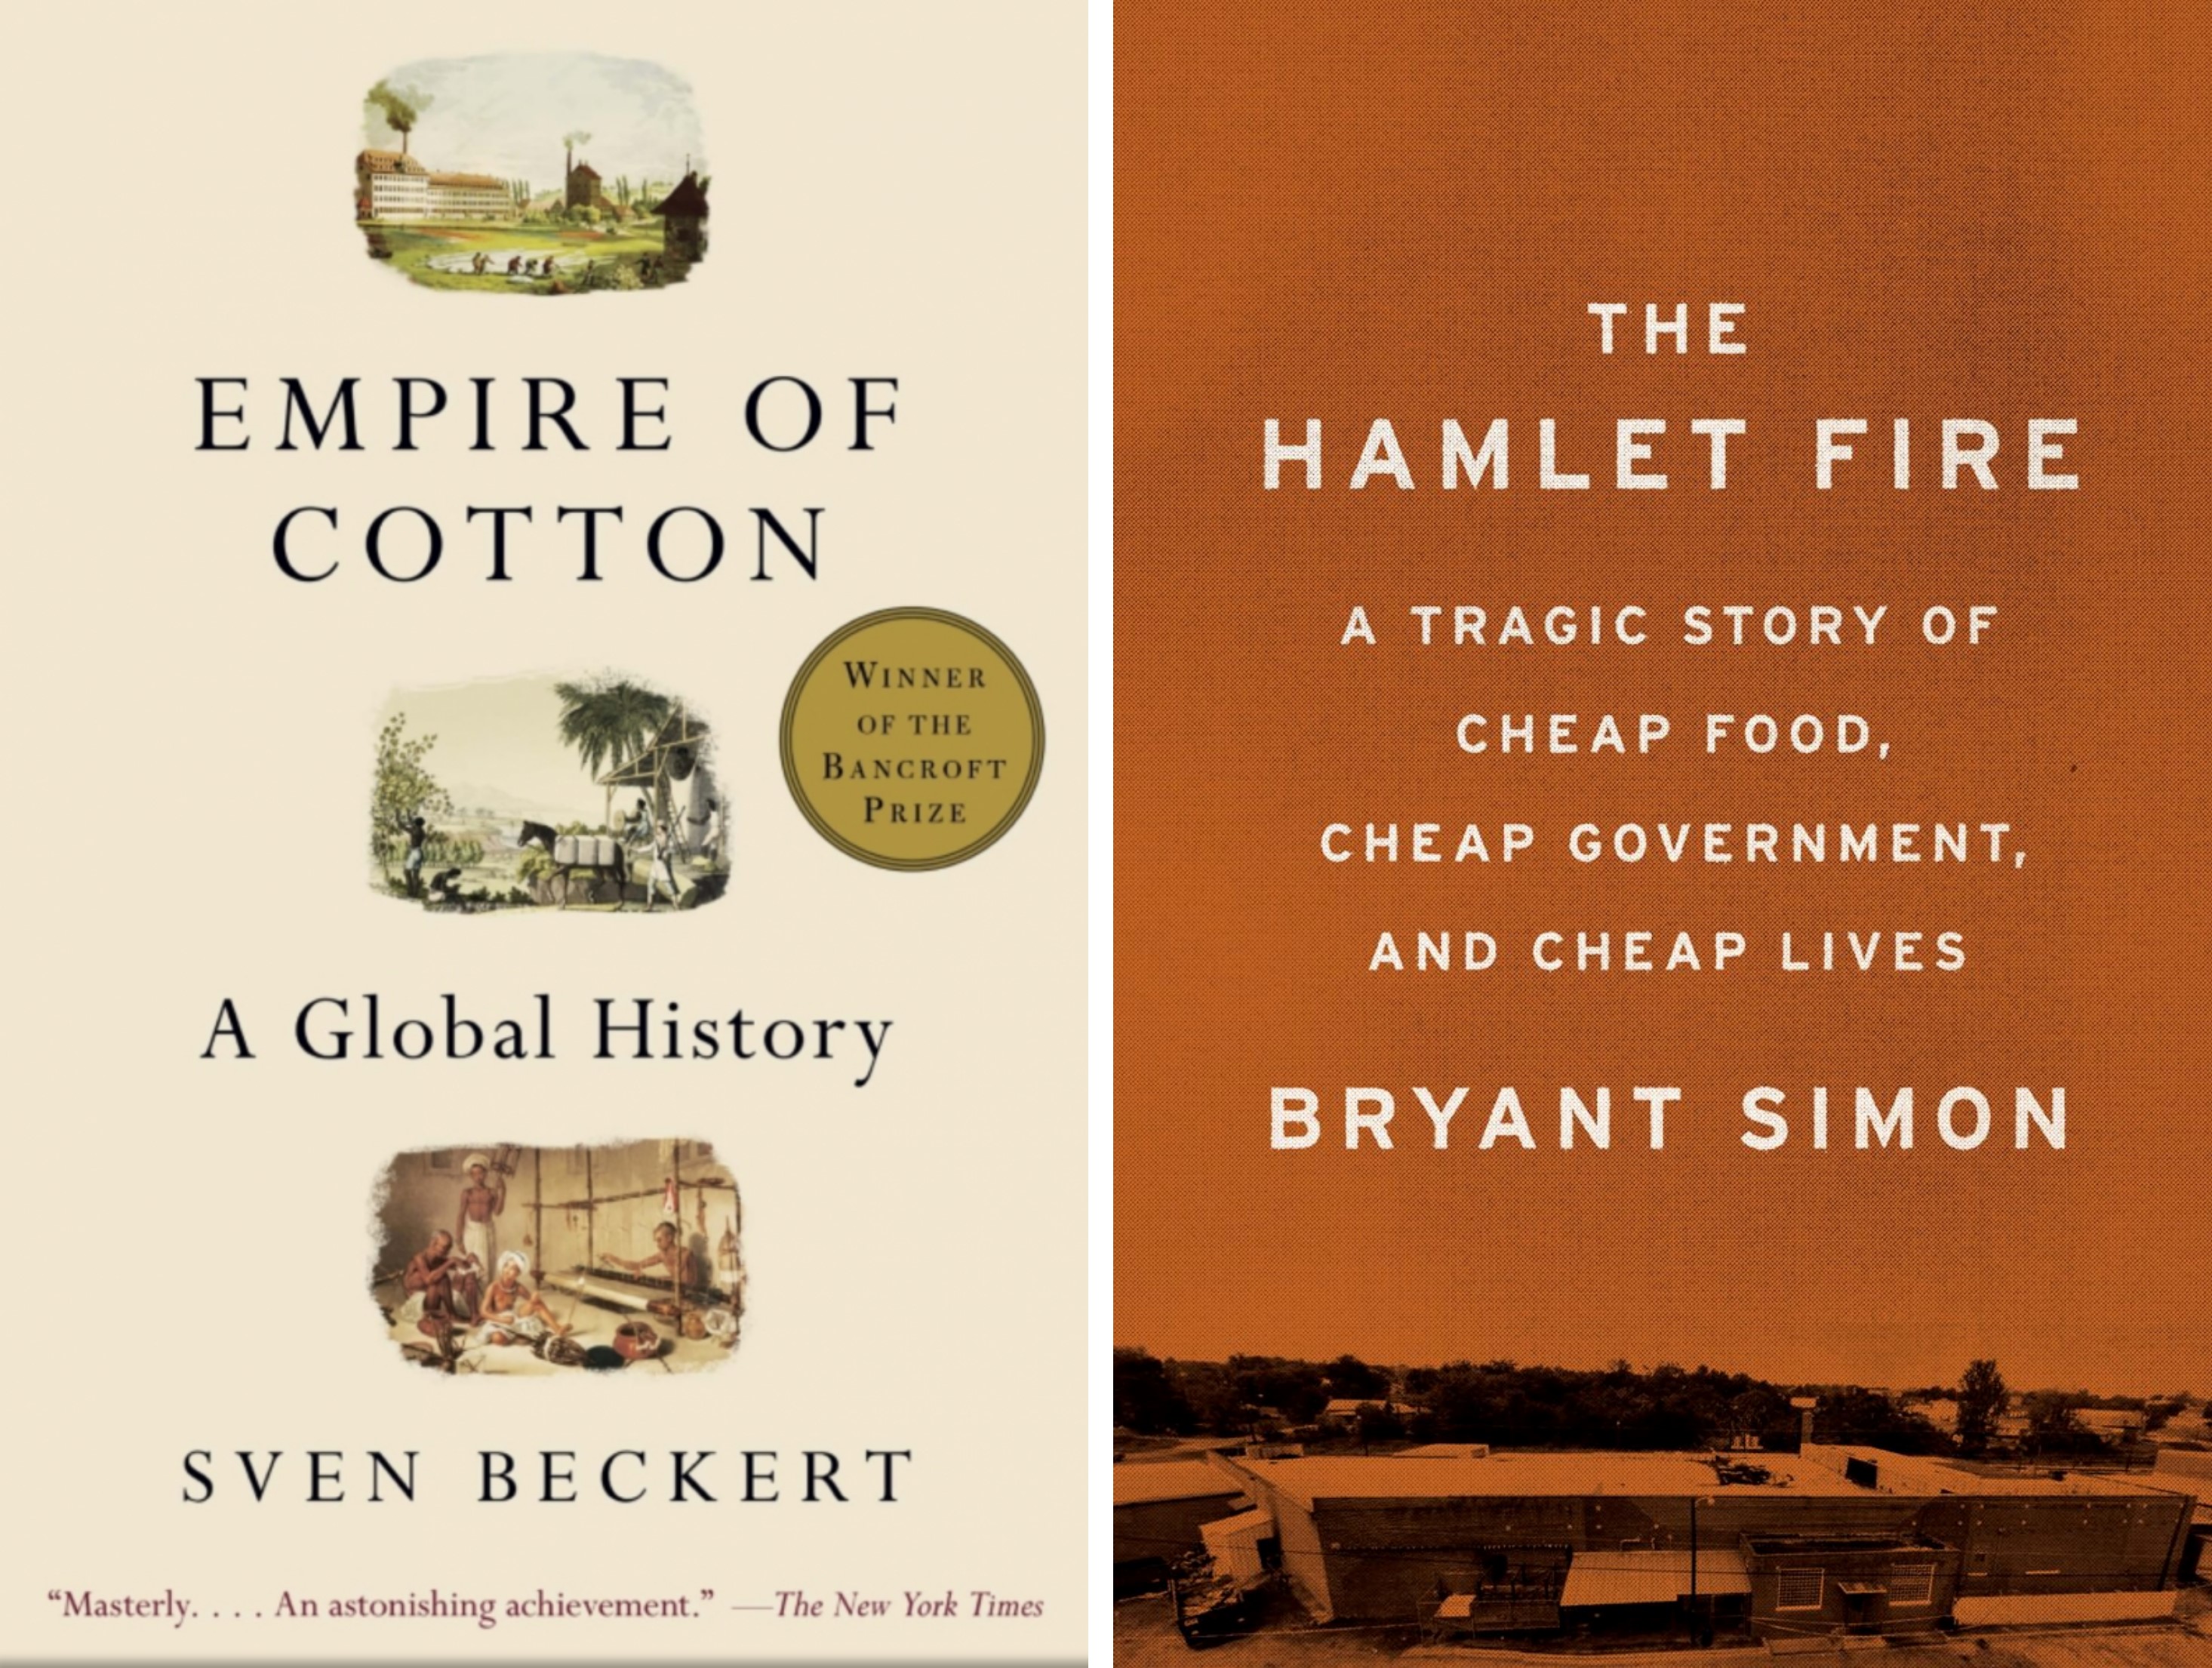 On the left, the cover of 'Empire of Cotton.' On the right, the cover of 'The Hamlet Fire.'